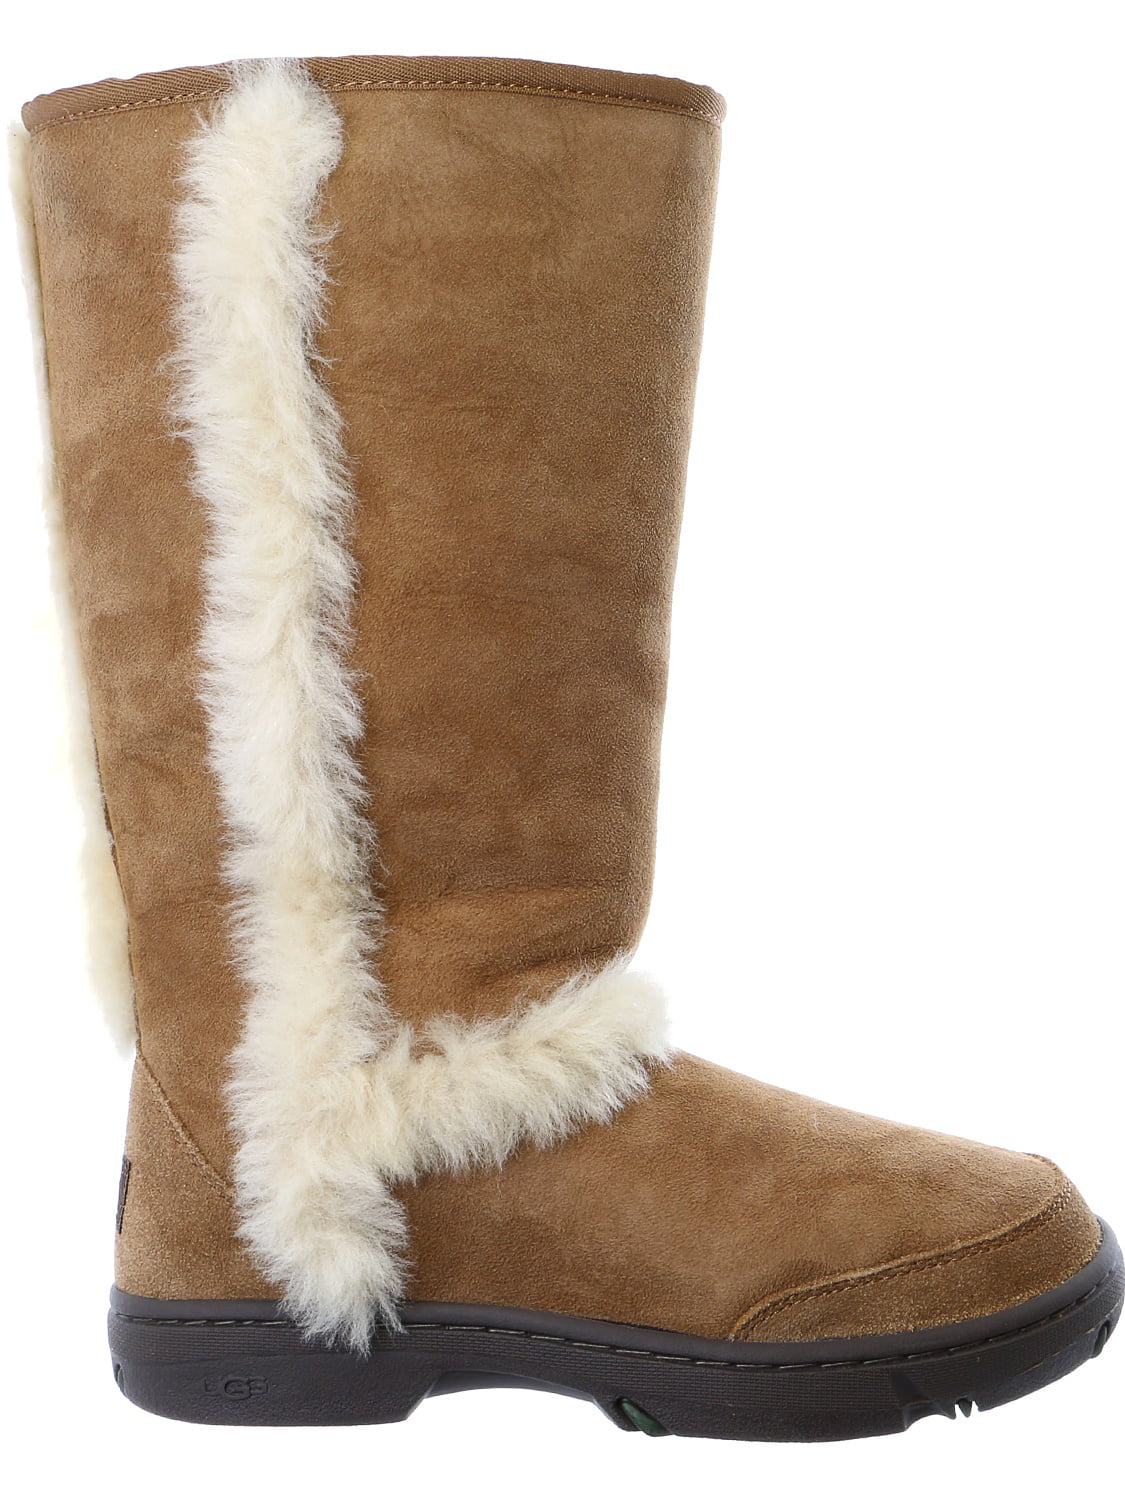 boots for women ugg